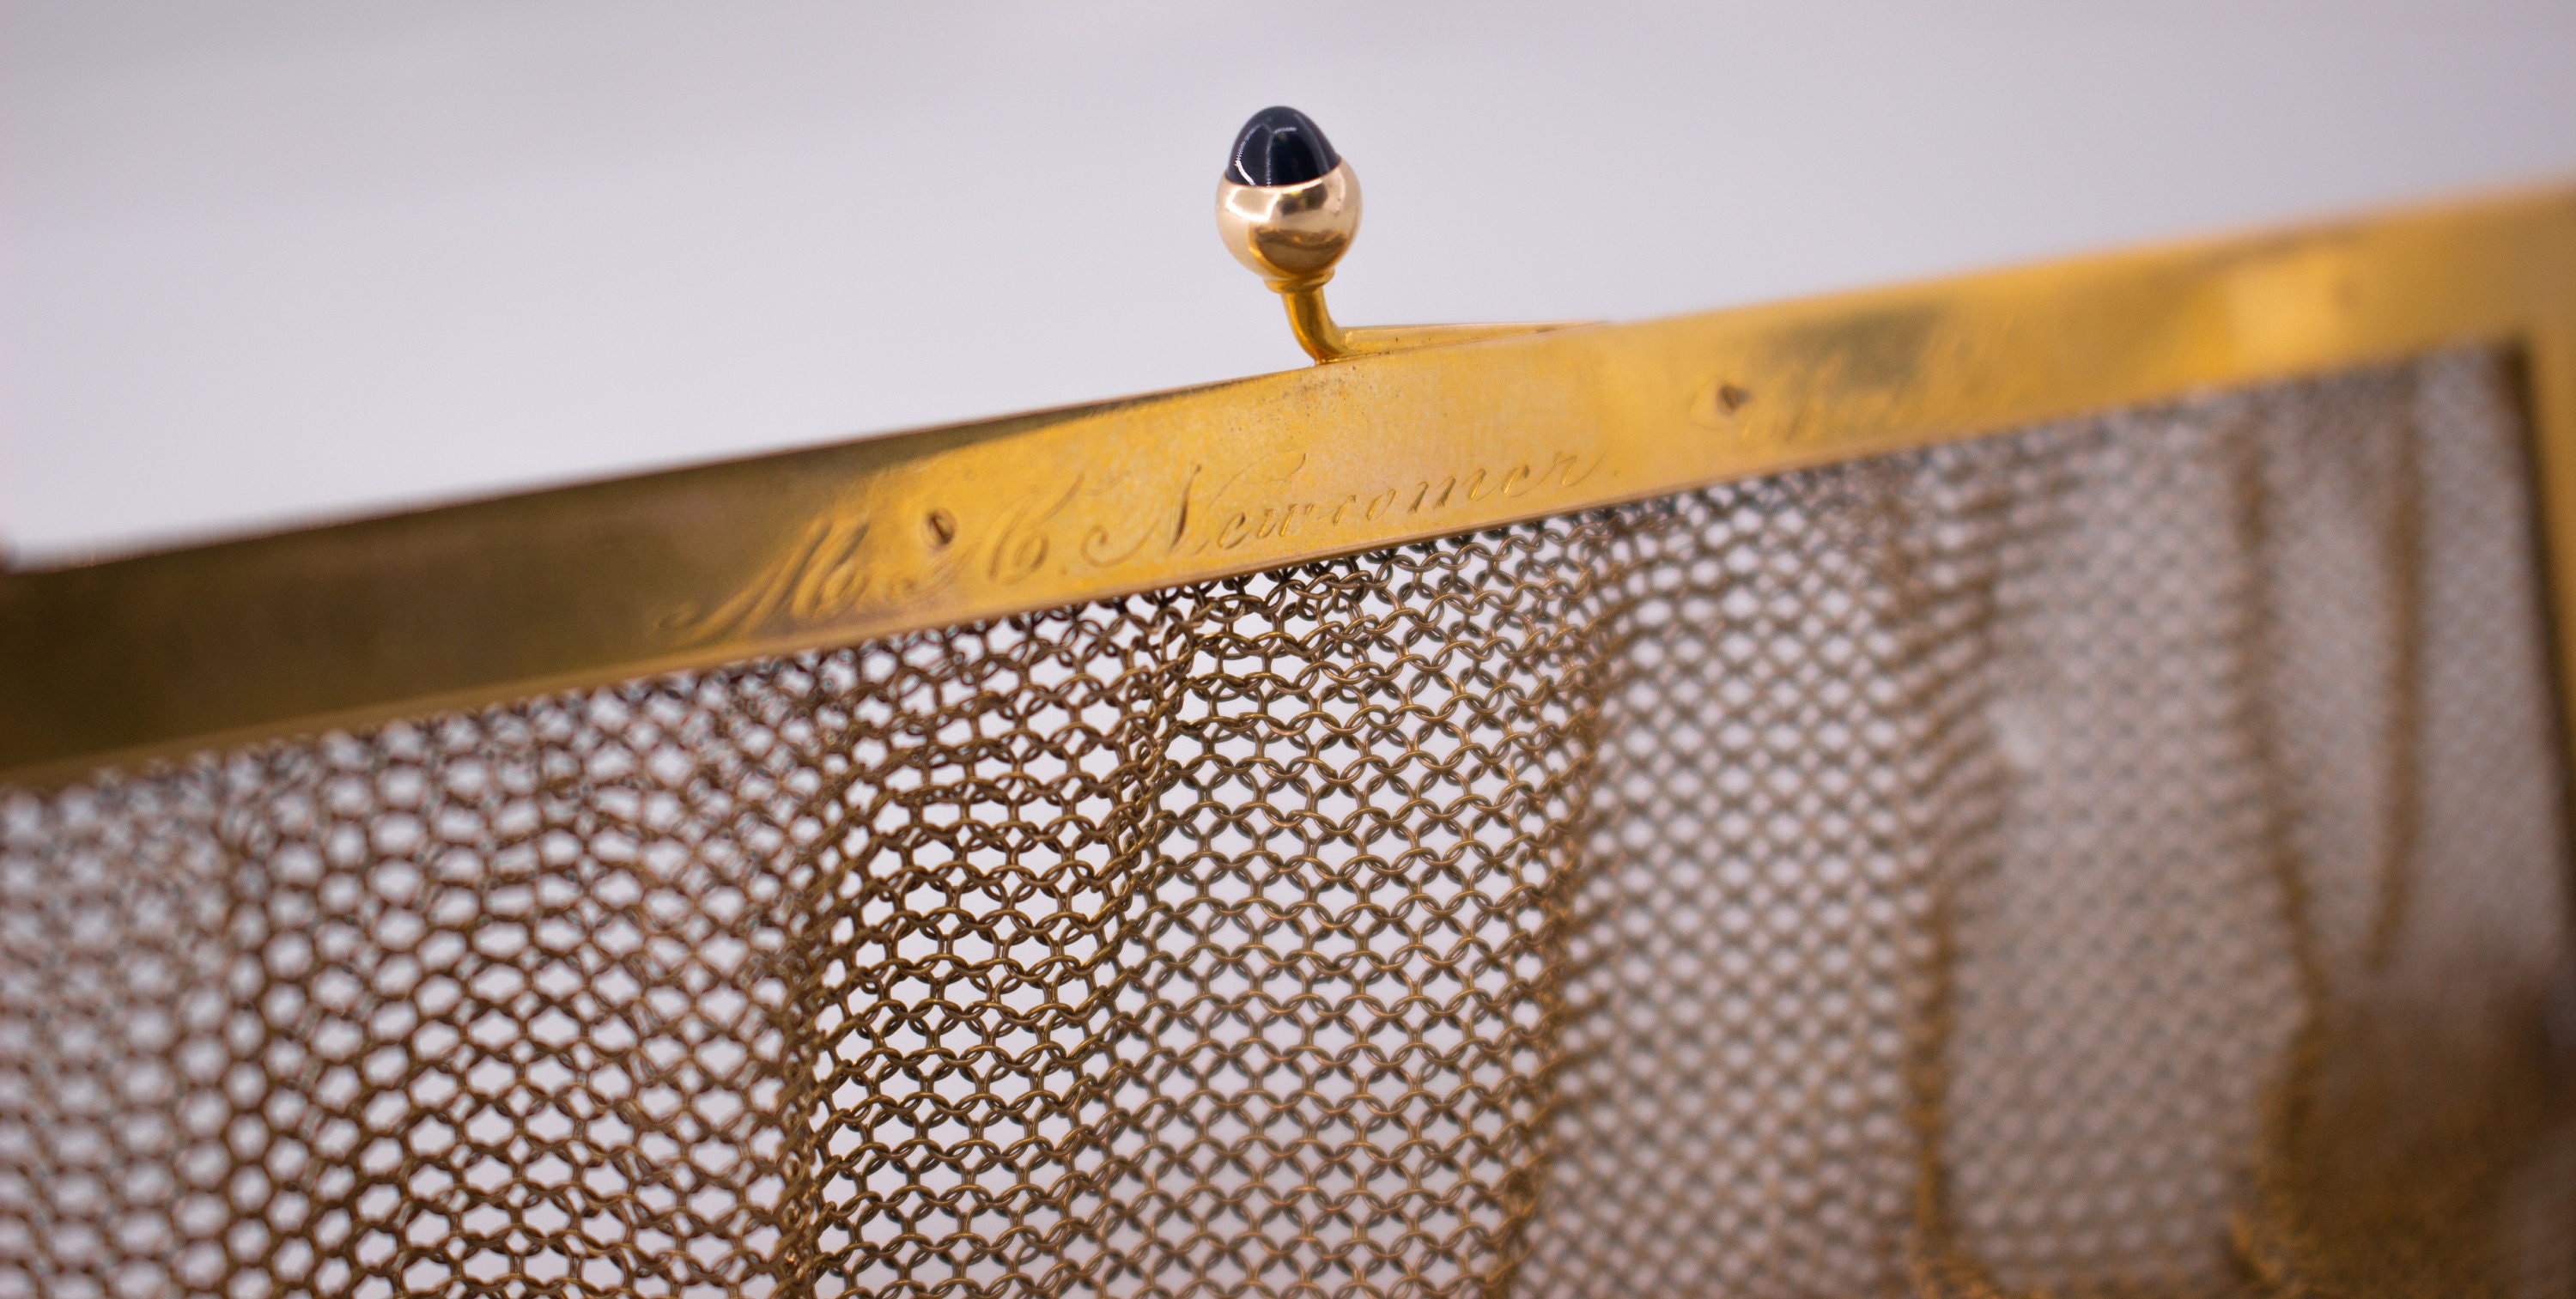 Product Image for Art Deco 1920s Antique Mesh Chainmaille Purse 14k Yellow Gold Sapphire Closure